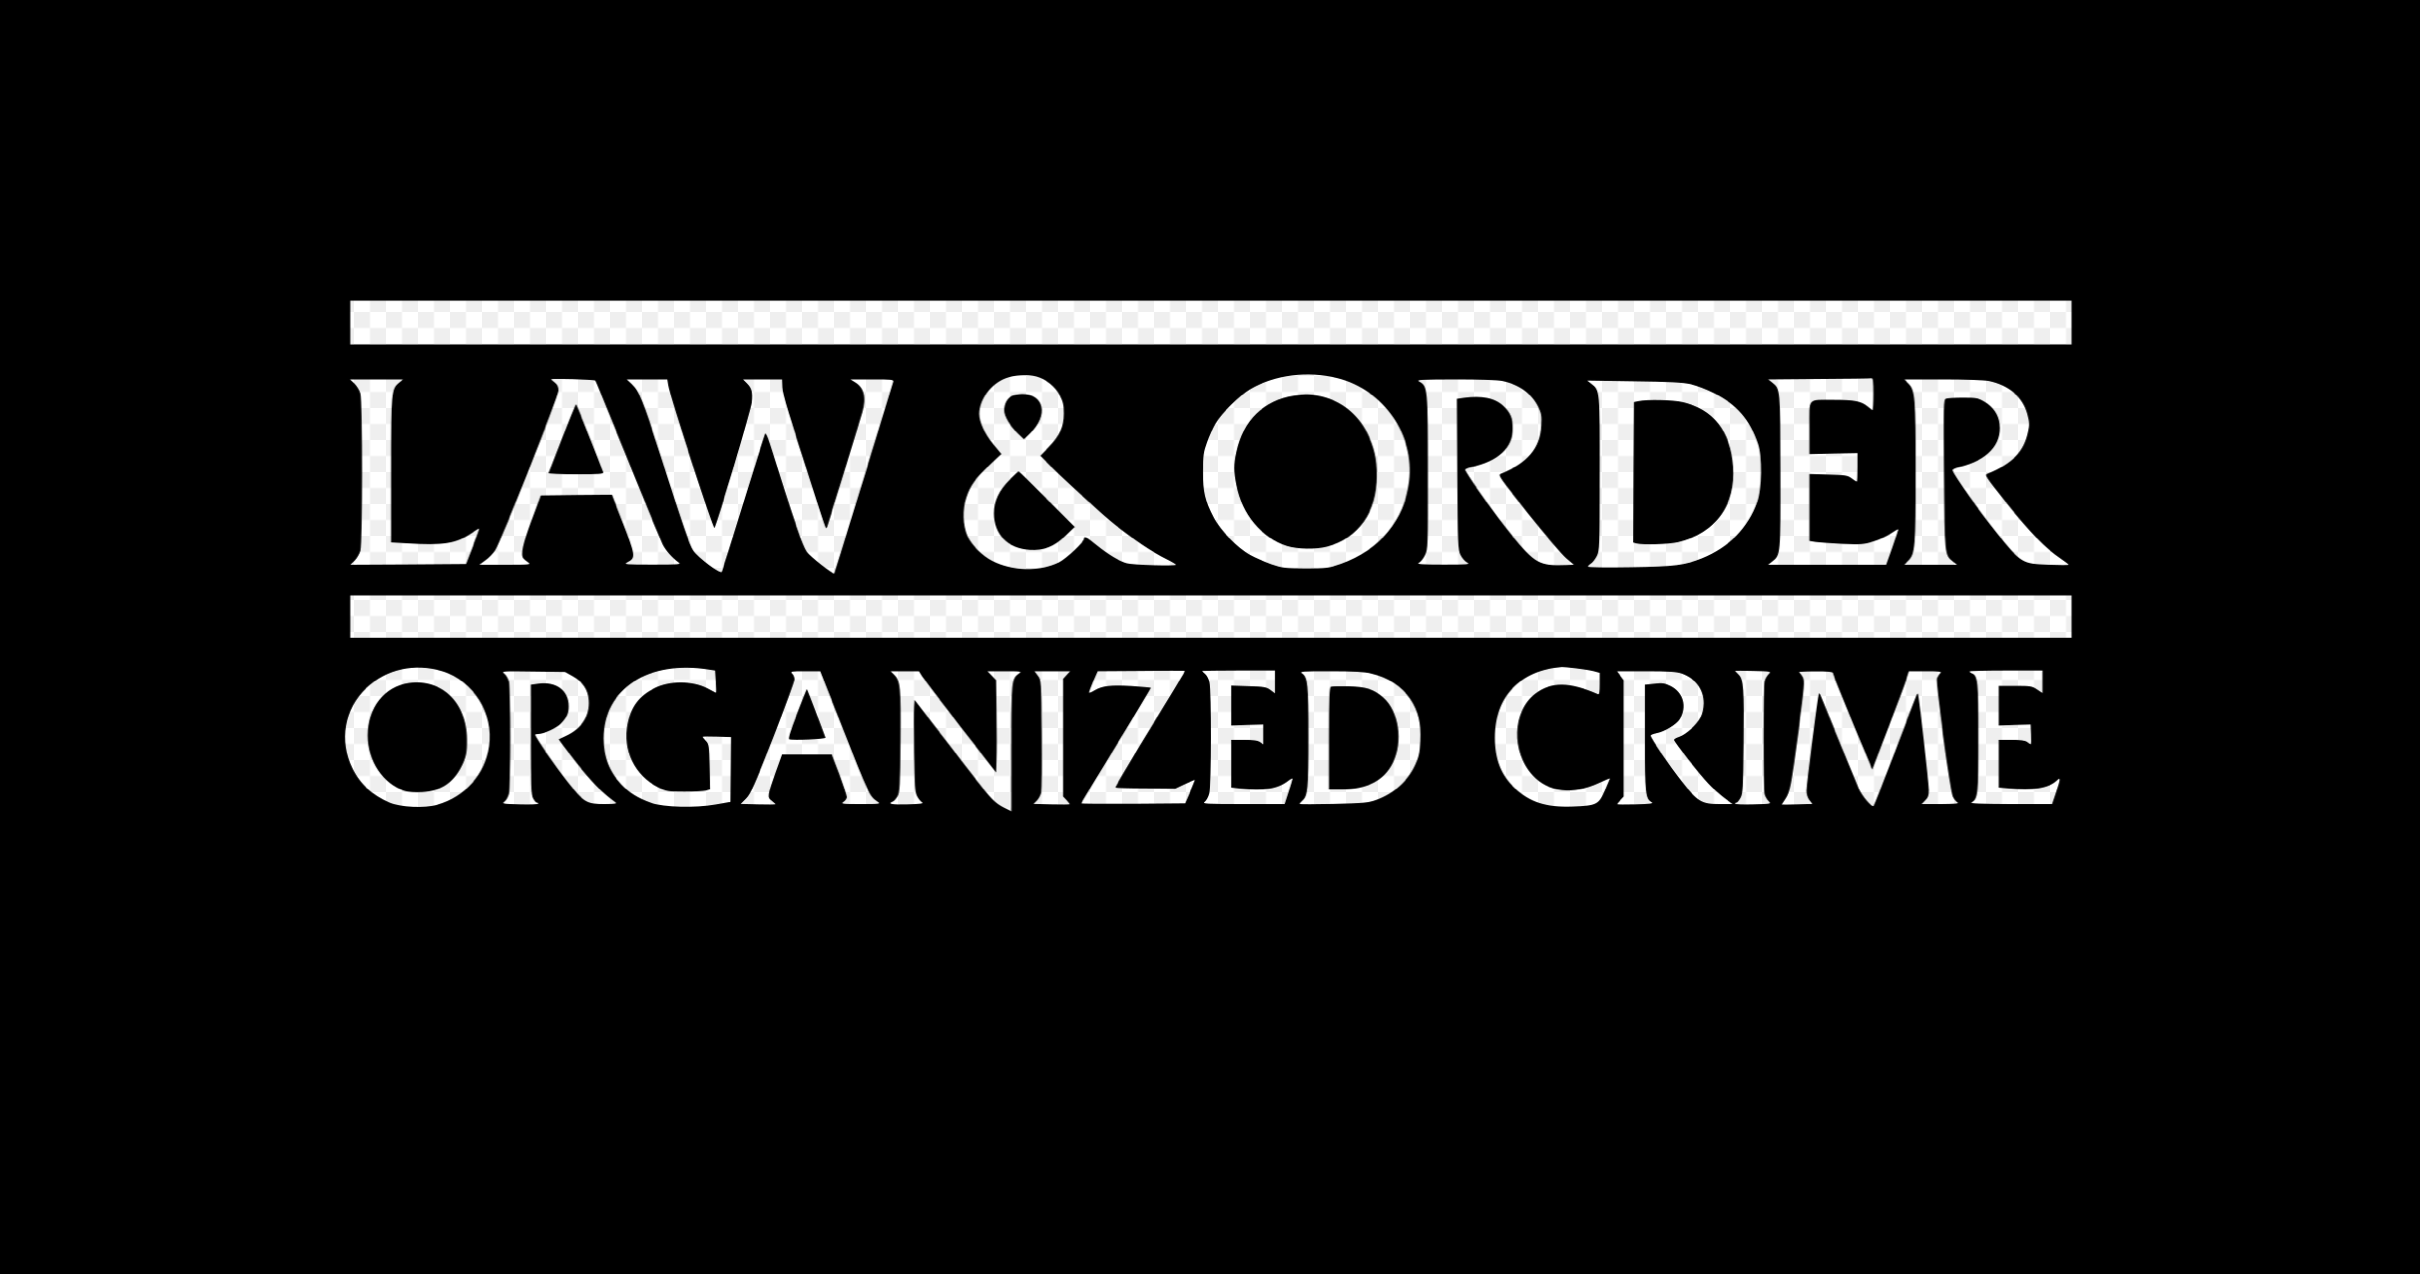 Yet More Media Misinformation: Machine guns used by criminals, NBC’s Law & Order: Organized Crime